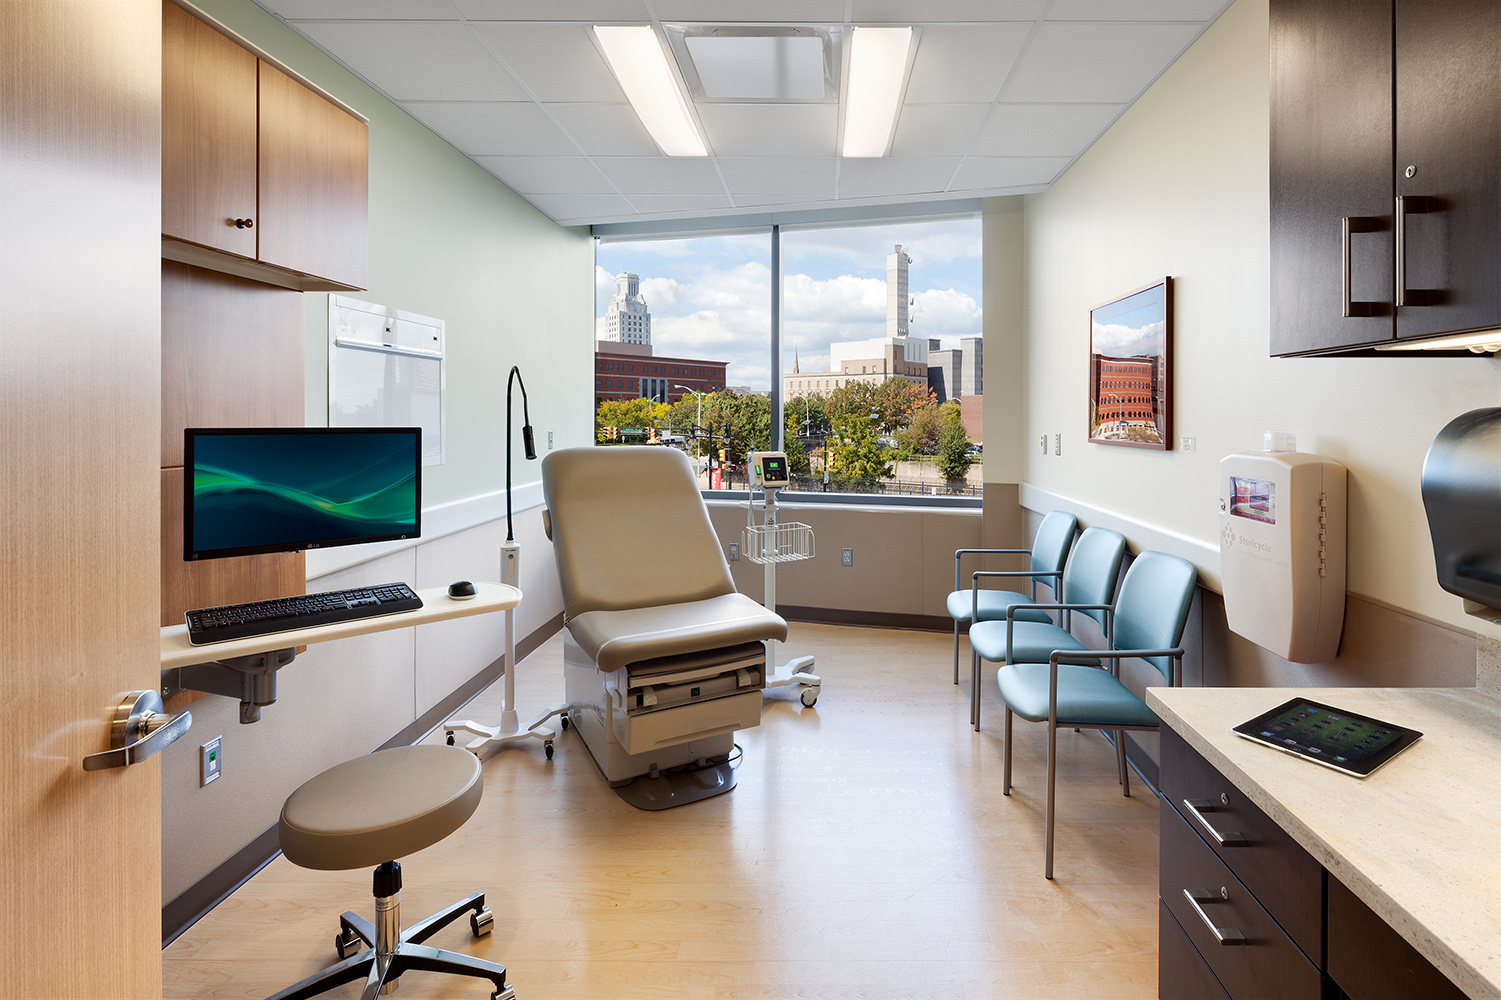 Unity tandem ceiling lights in patient room lighting design with an exam chair and medical staff computer.